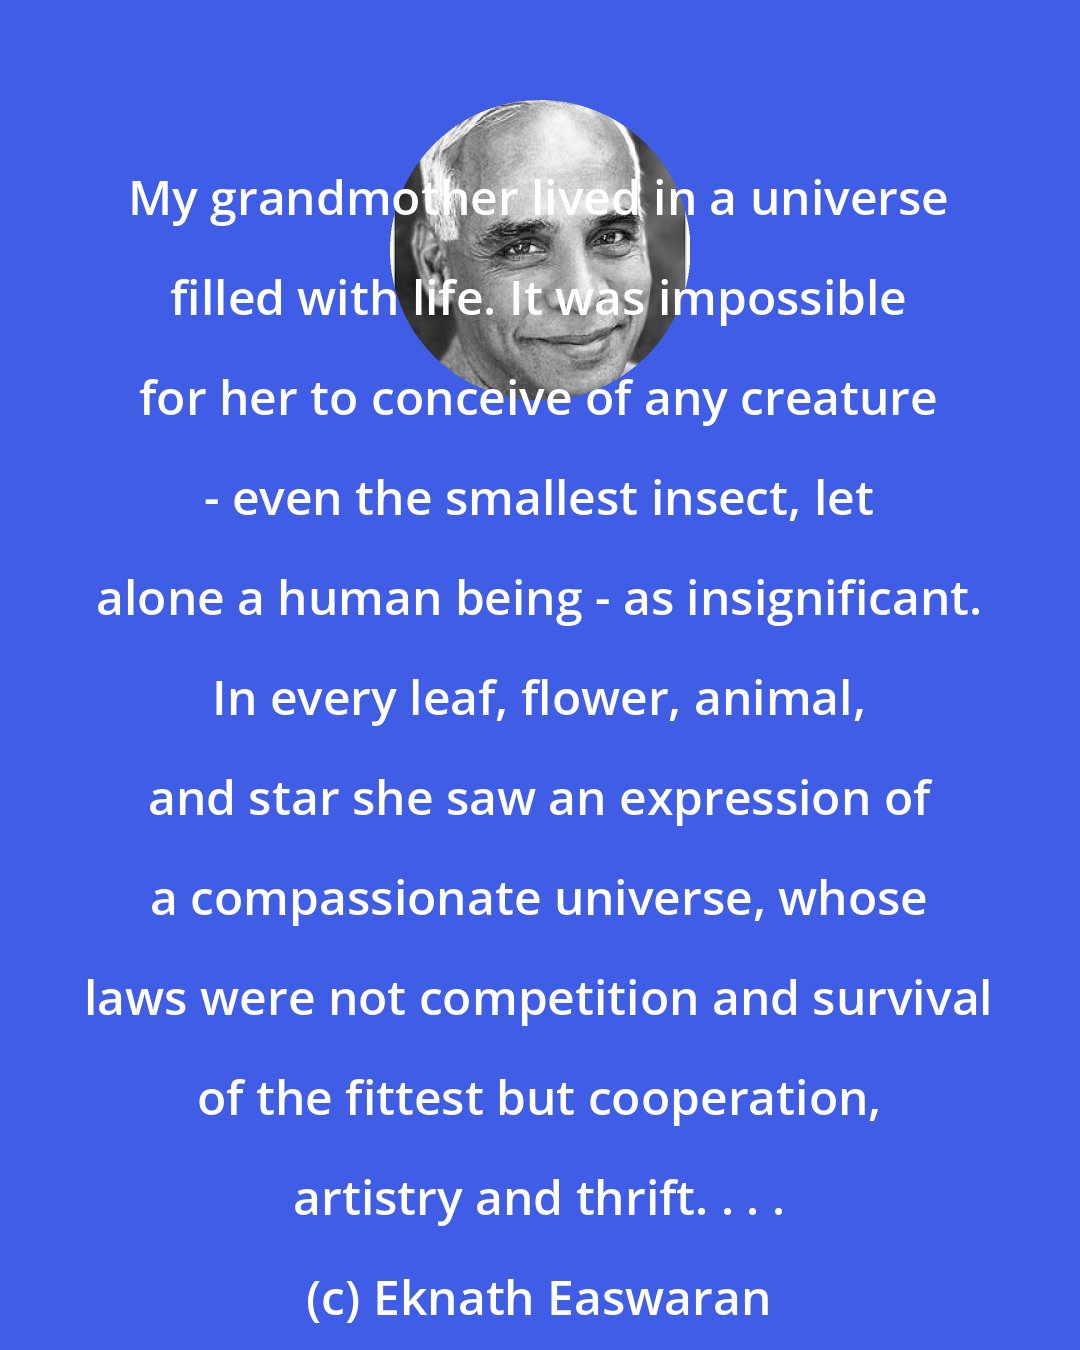 Eknath Easwaran: My grandmother lived in a universe filled with life. It was impossible for her to conceive of any creature - even the smallest insect, let alone a human being - as insignificant. In every leaf, flower, animal, and star she saw an expression of a compassionate universe, whose laws were not competition and survival of the fittest but cooperation, artistry and thrift. . . .